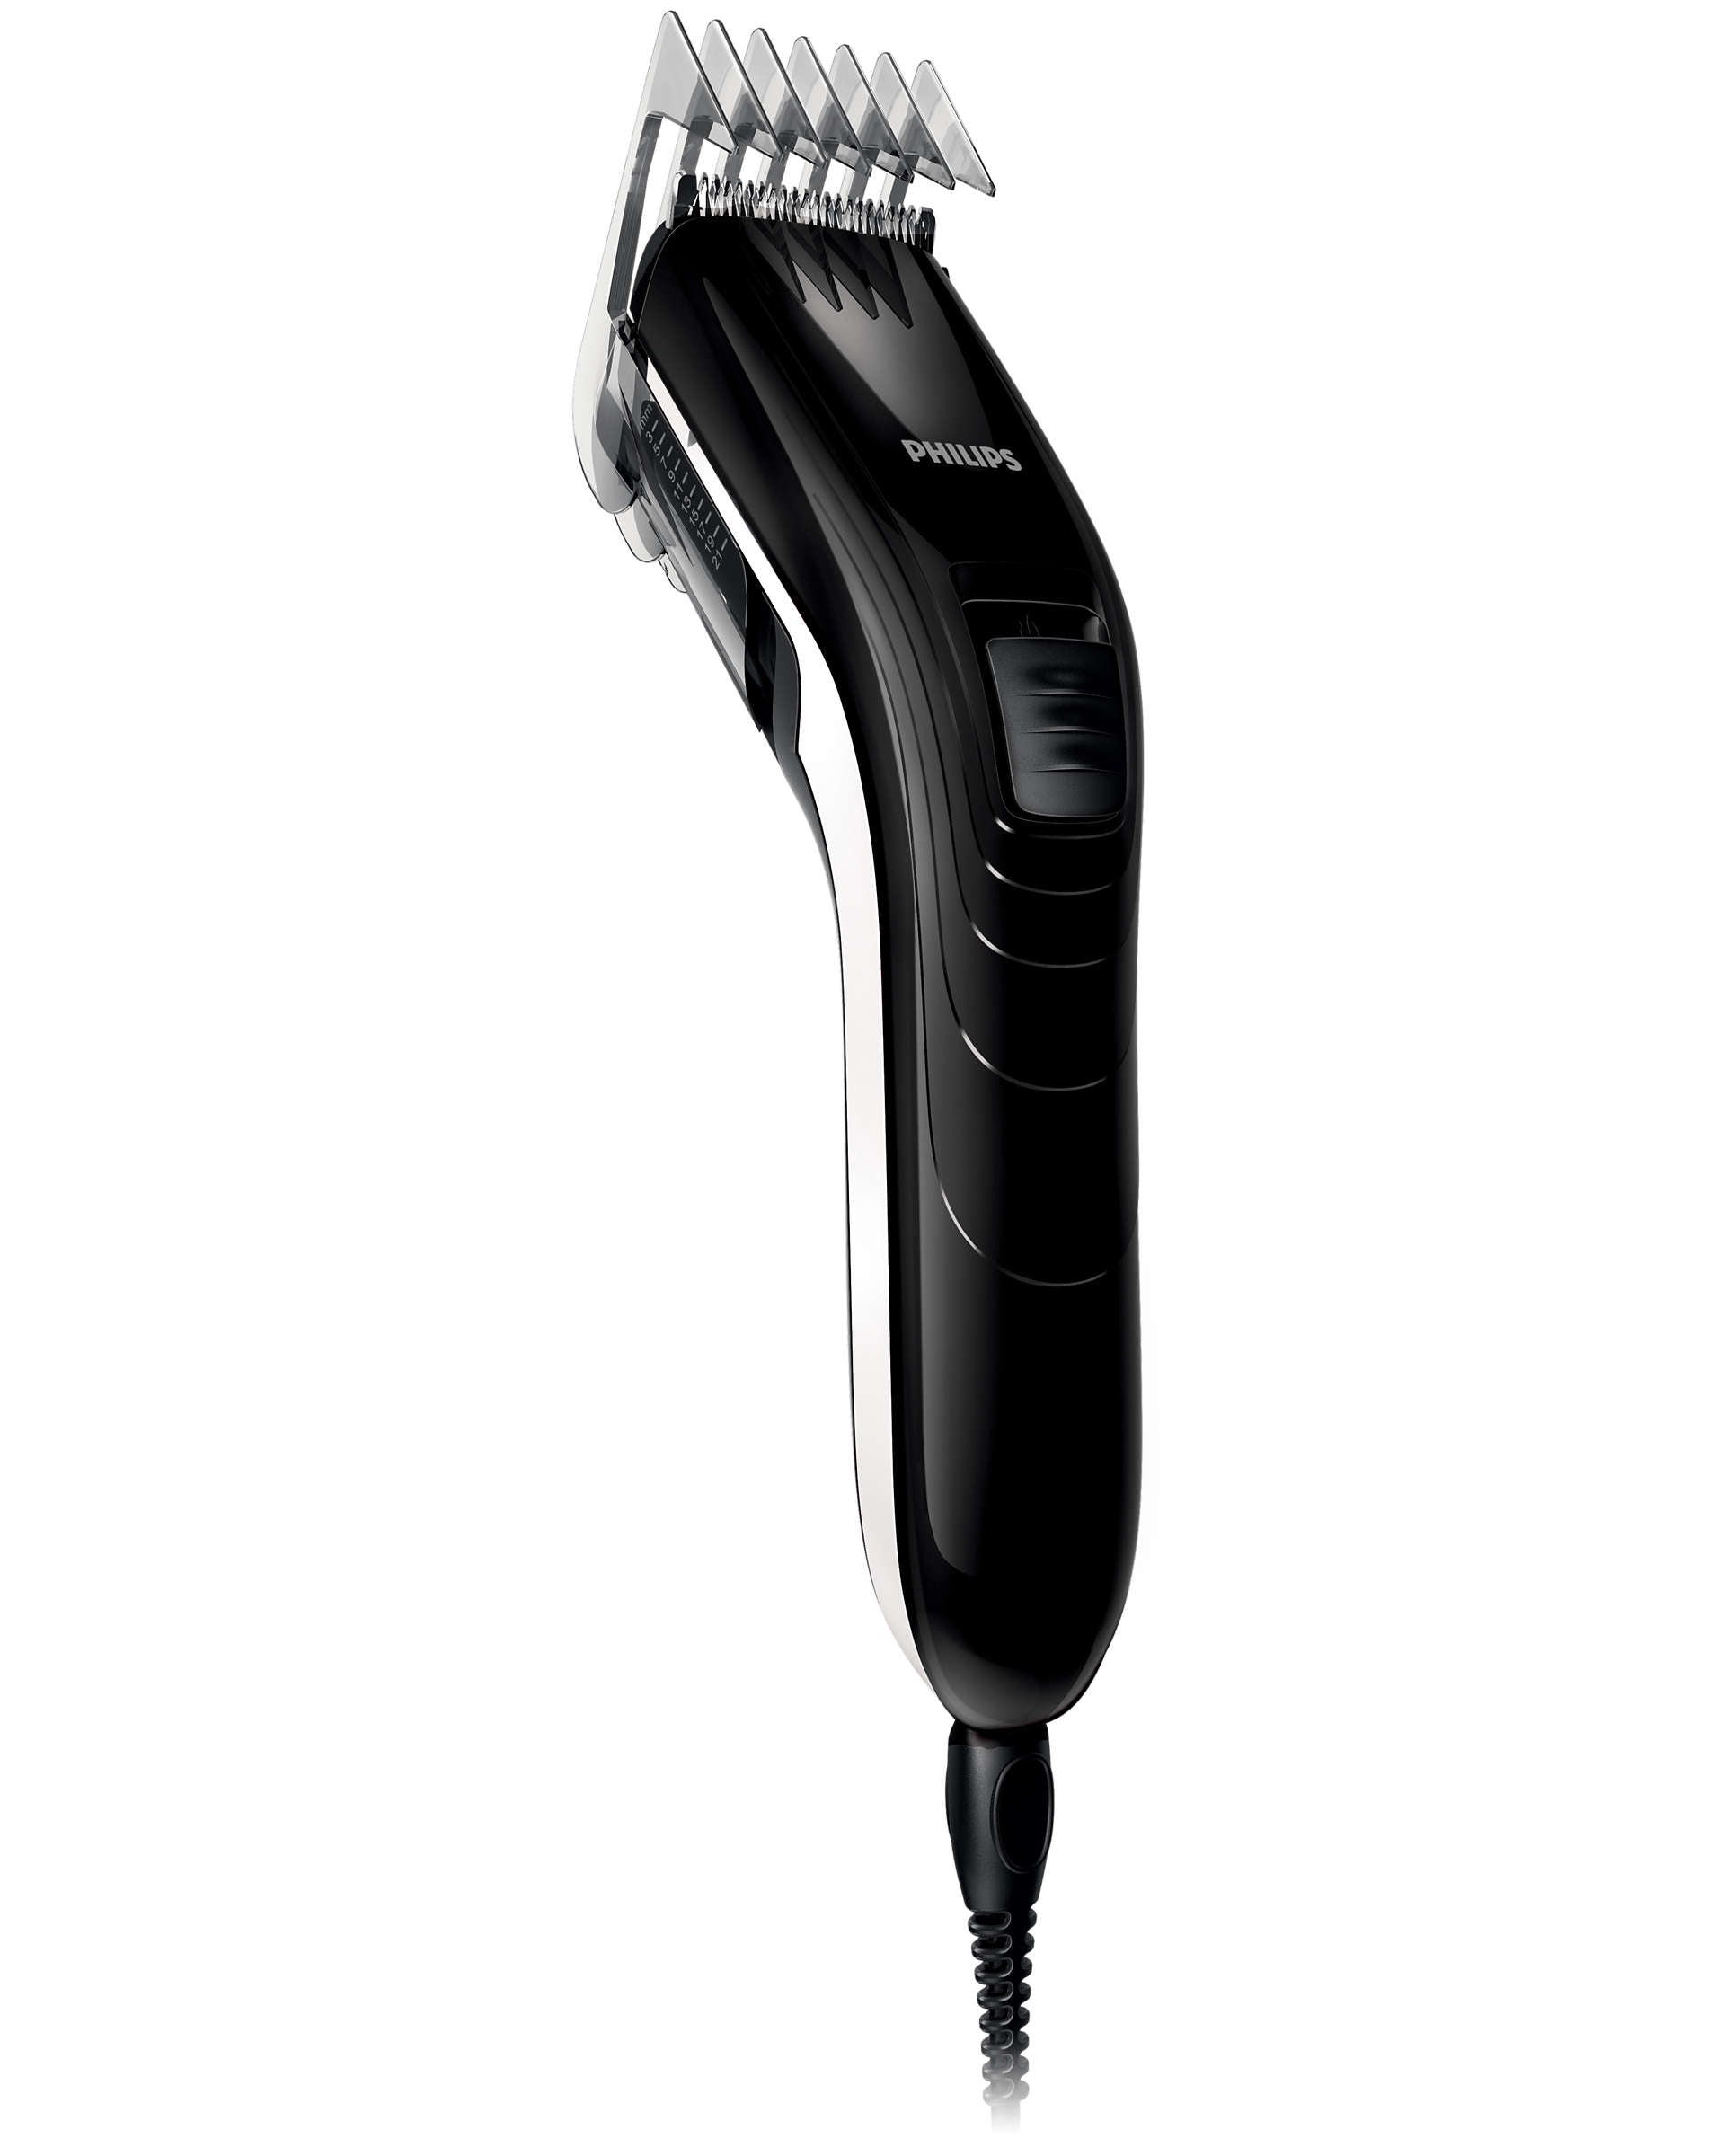 Philips Hairclipper Series 3000 Family Hair Clippers